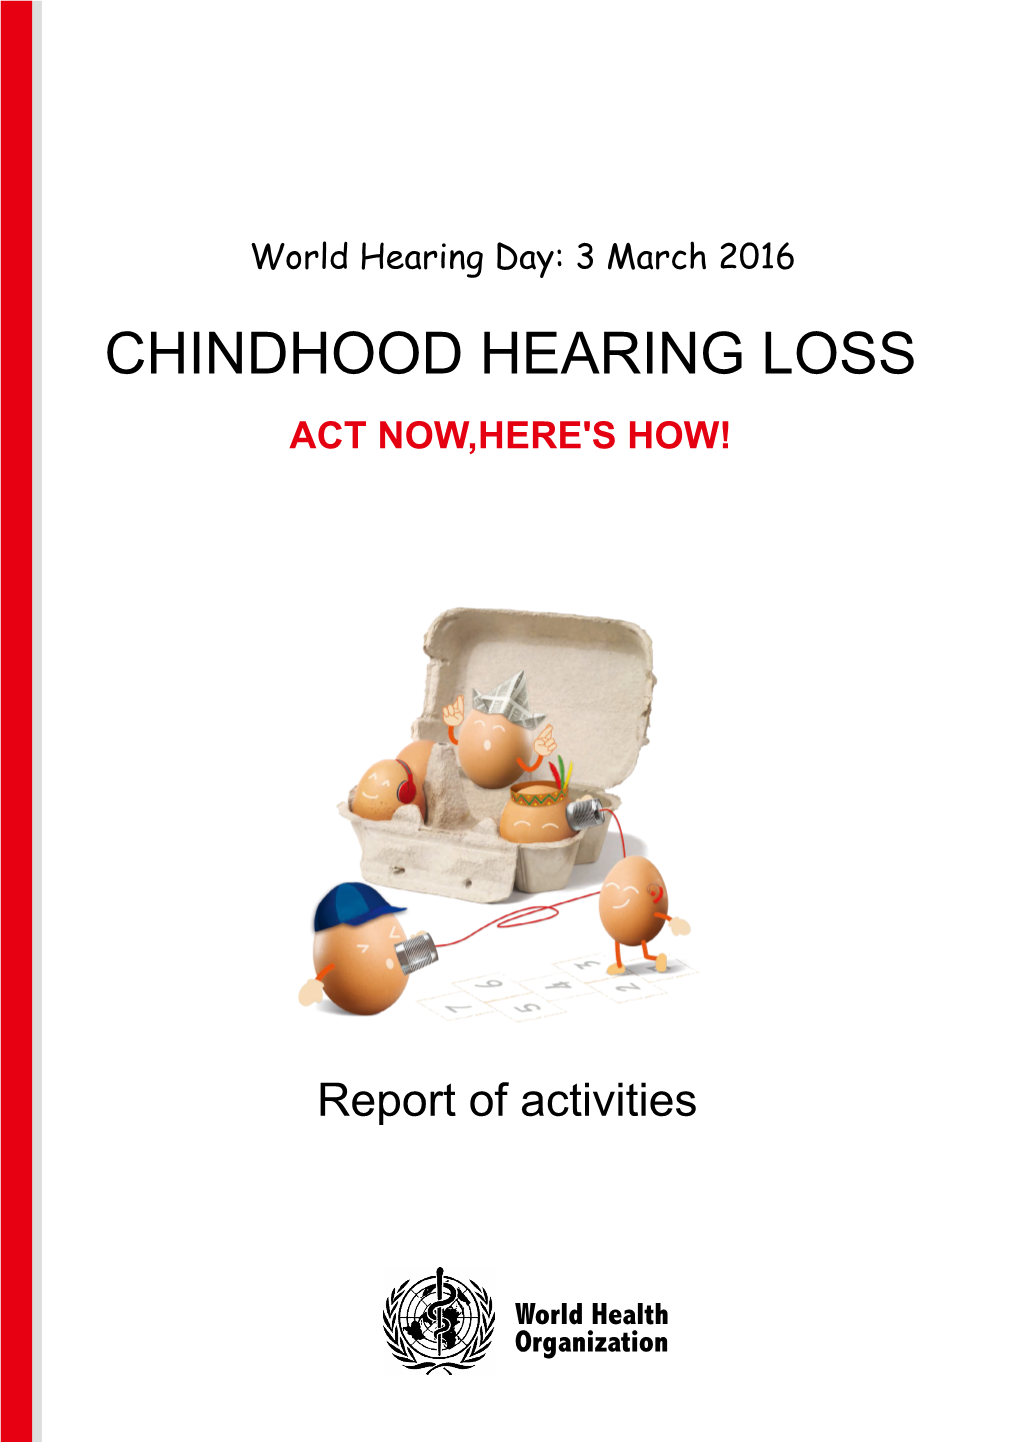 Chindhood Hearing Loss Act Now,Here's How!